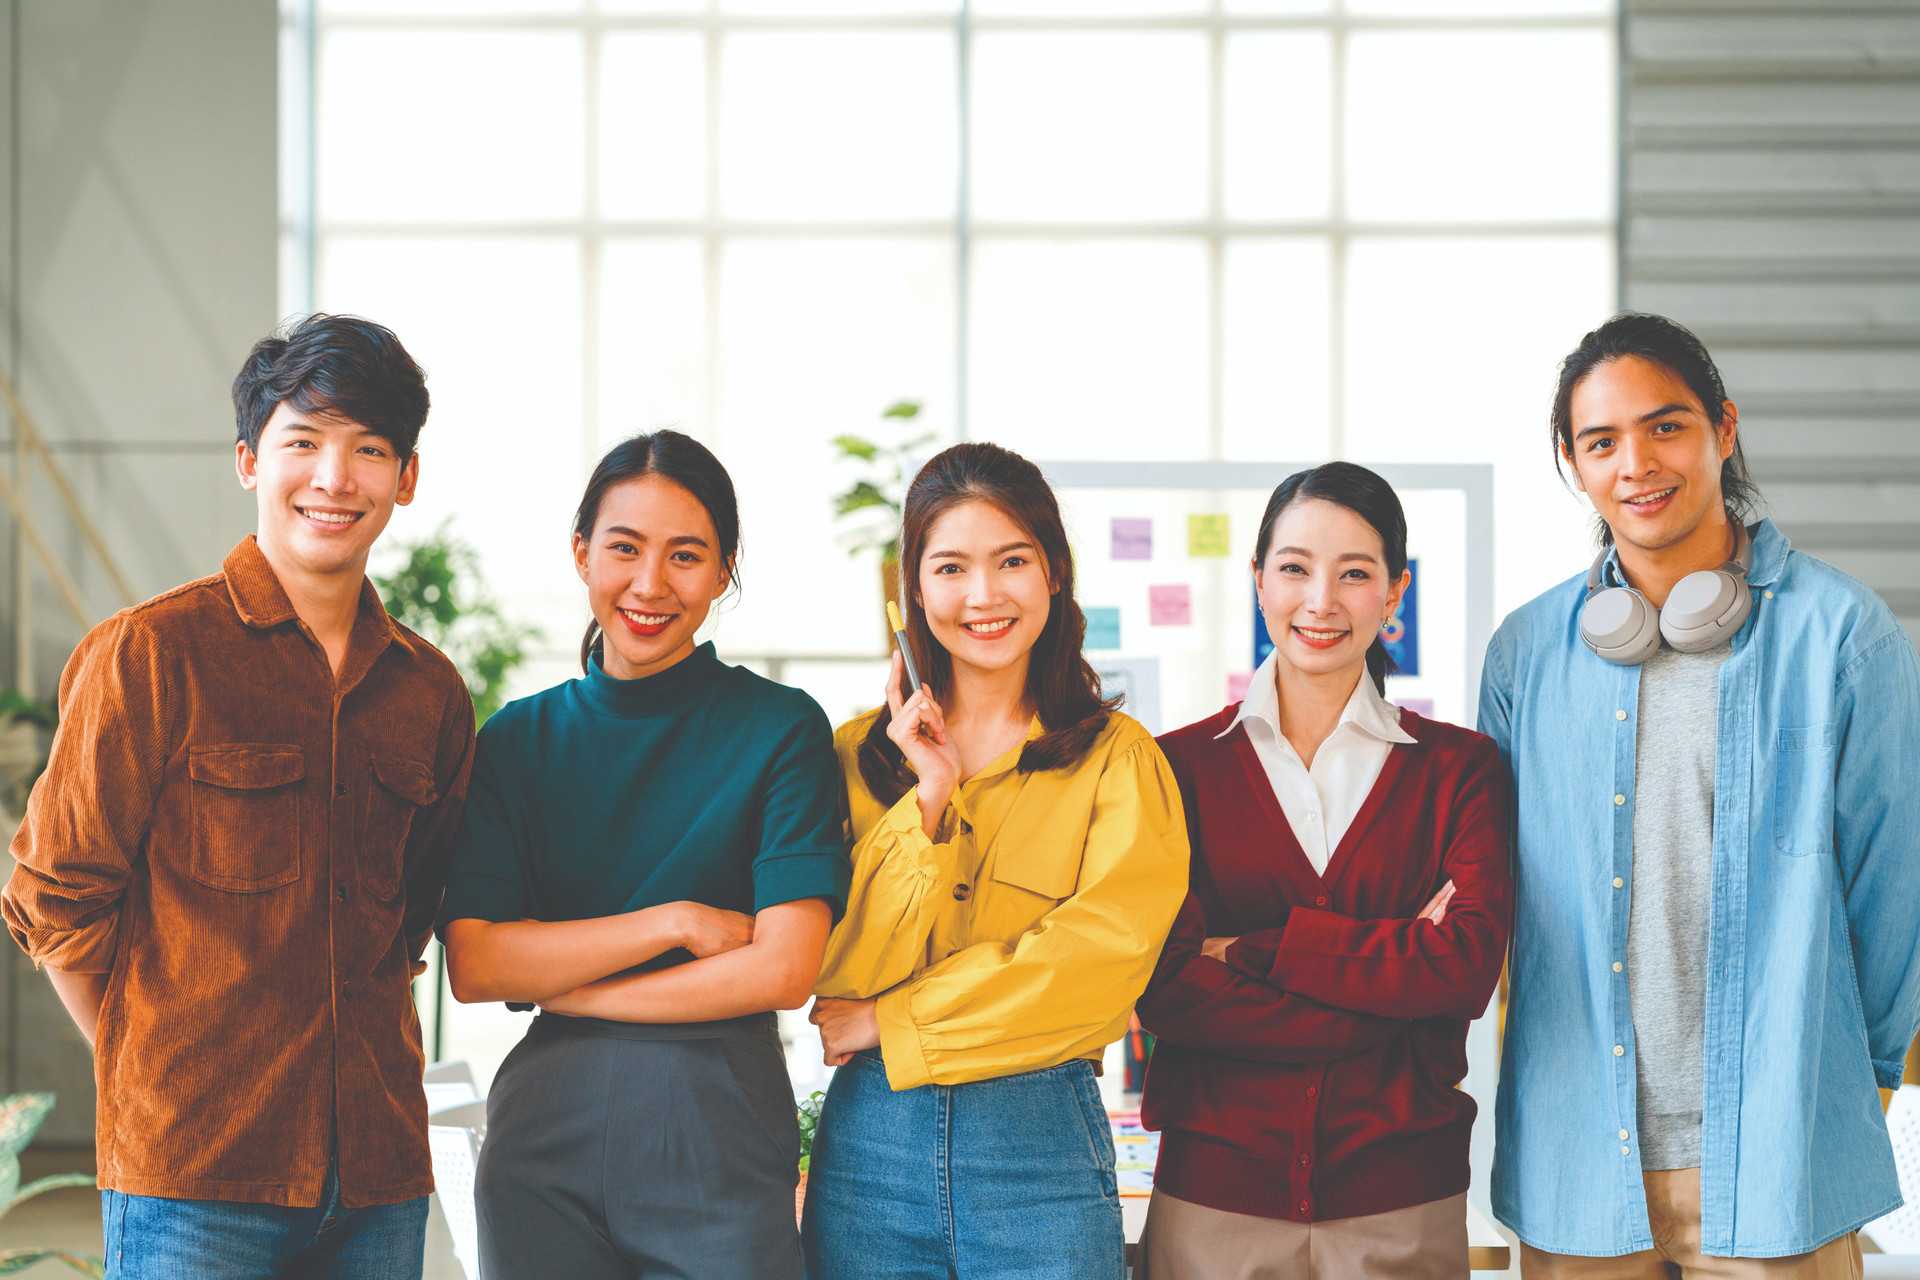 group-asia-young-creative-people-smart-casual-wear-smiling-arms-crossed-creative-office-workplace-diverse-asian-male-female-stand-together-startup-coworker-teamwork-concept-compressed.jpg